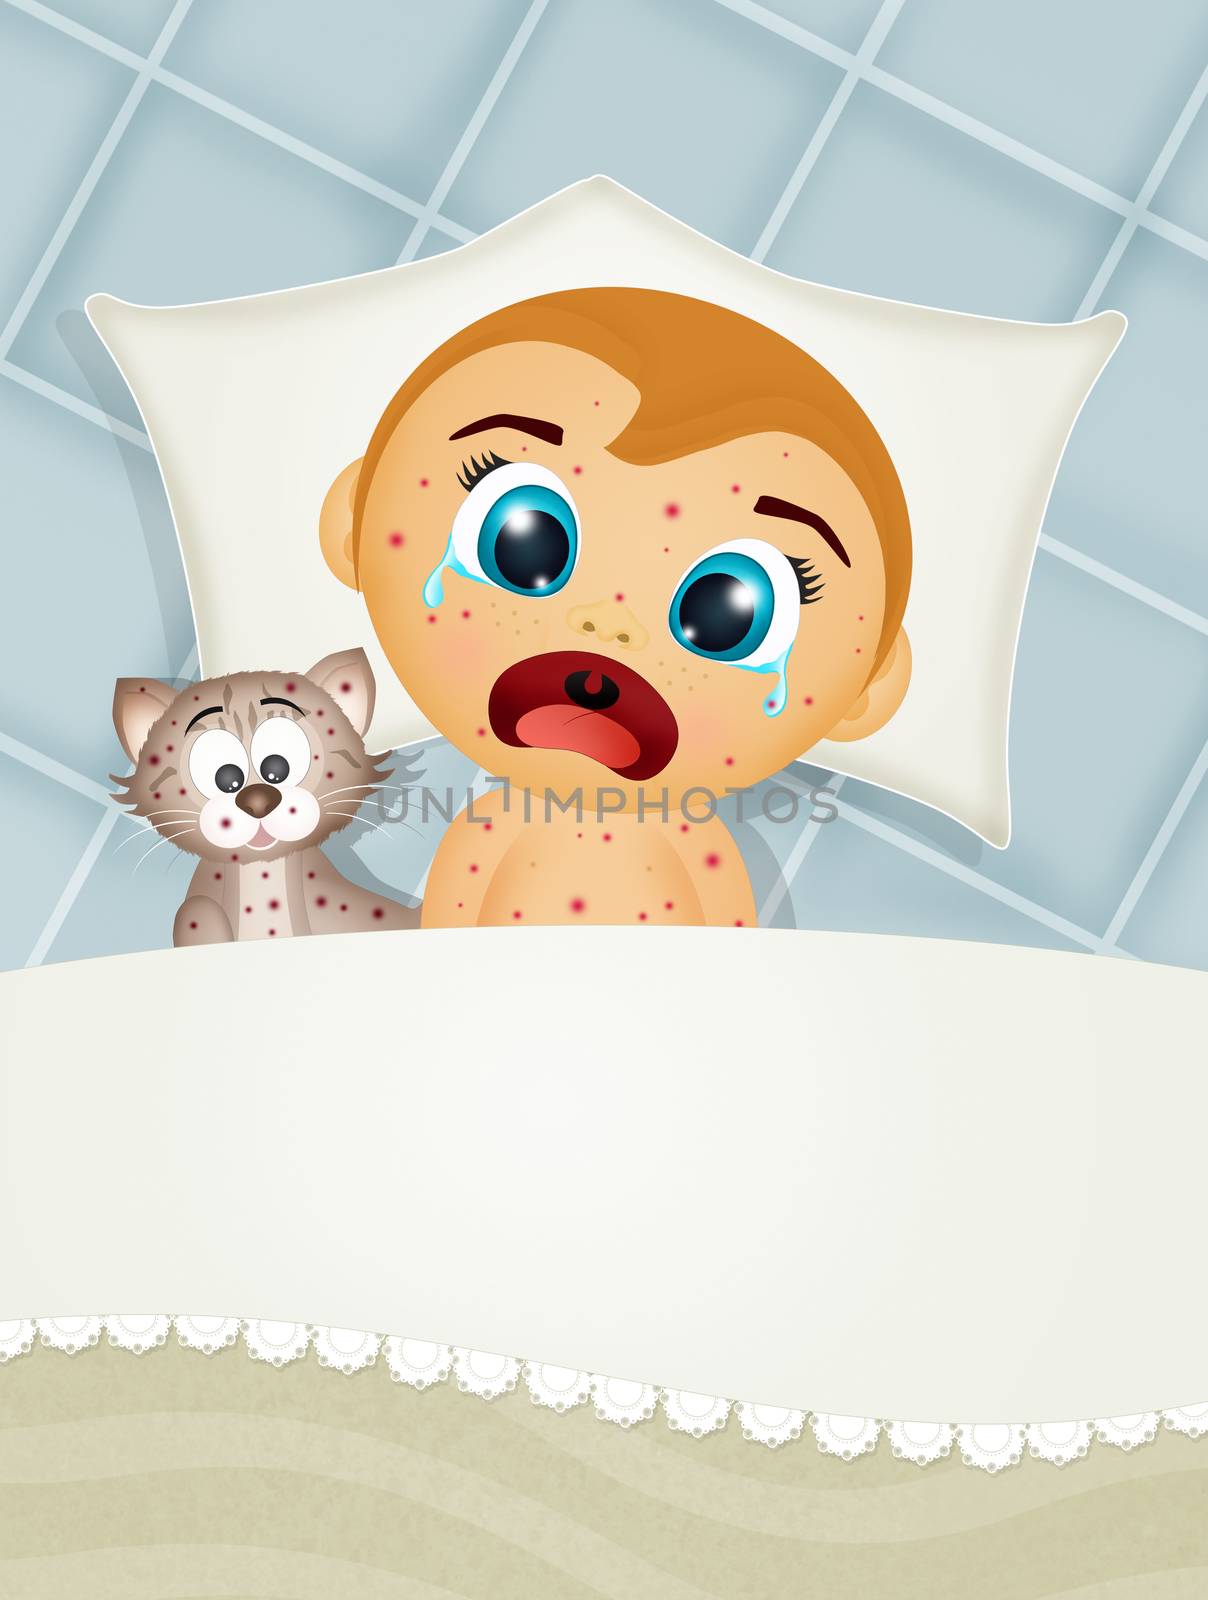 the baby with chickenpox in the bed by adrenalina